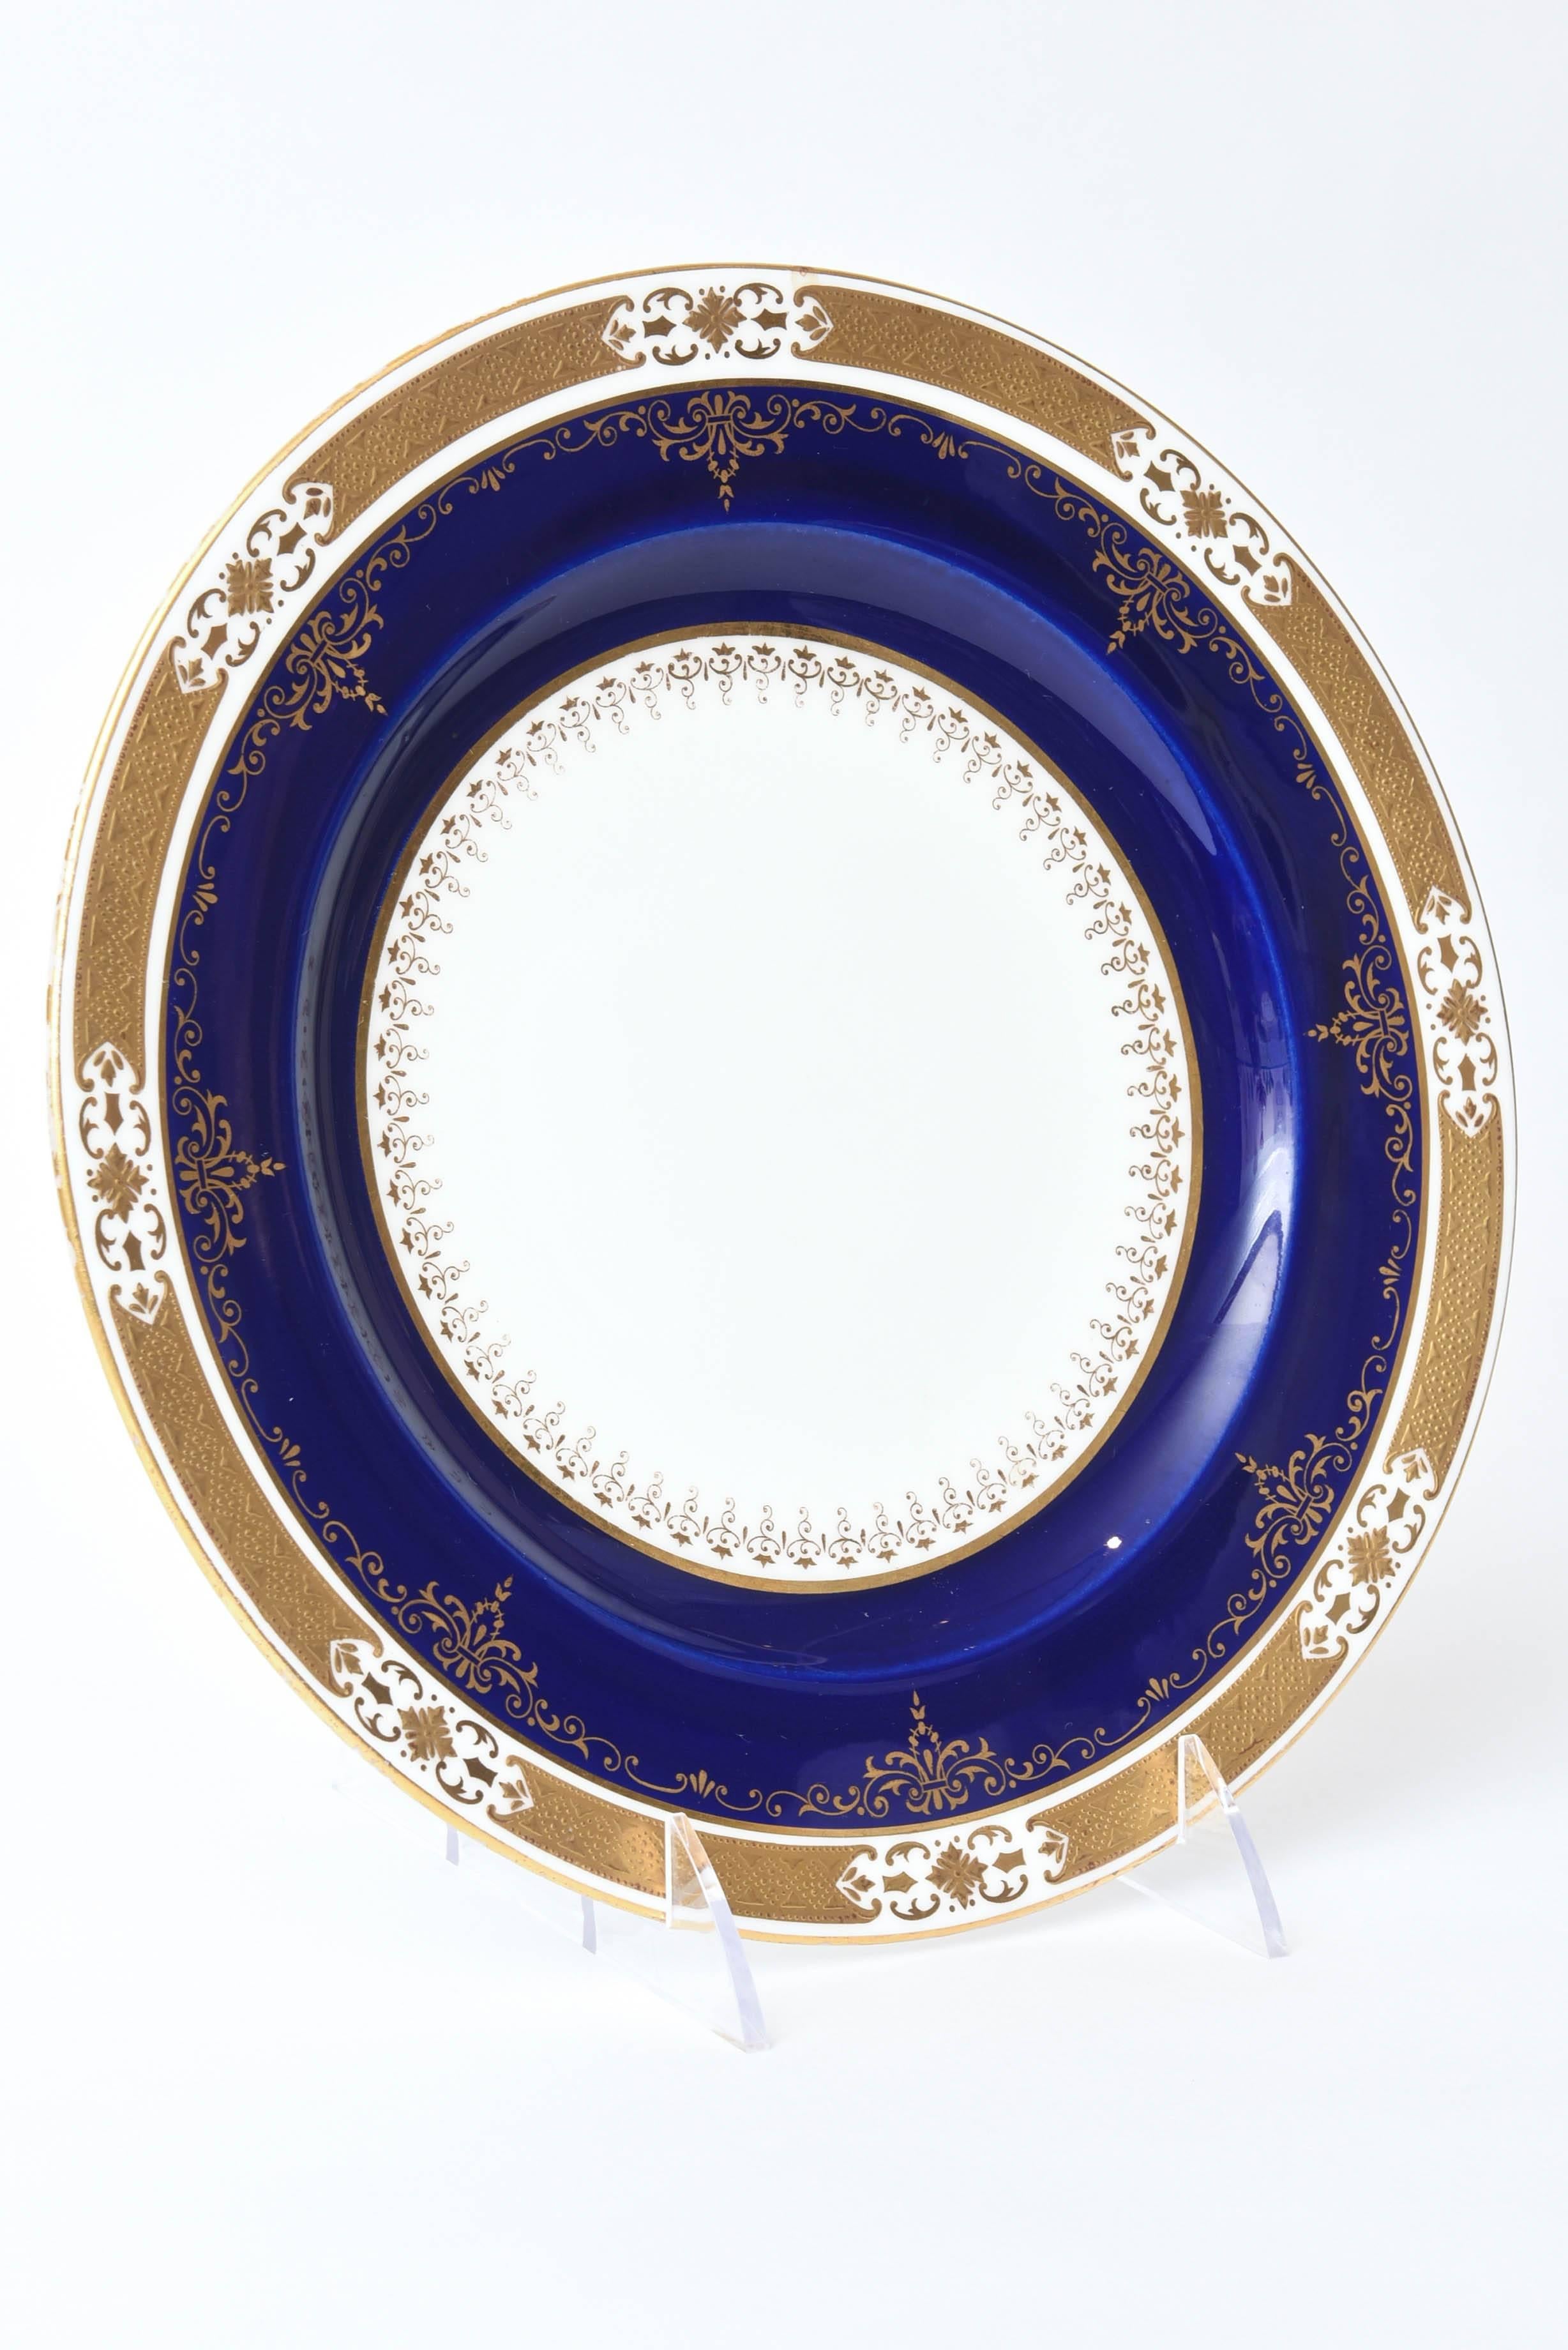 Early 20th Century Antique Cobalt and Gilt Encrusted Dinner Plates by Coalport, Set of 11 Custom For Sale